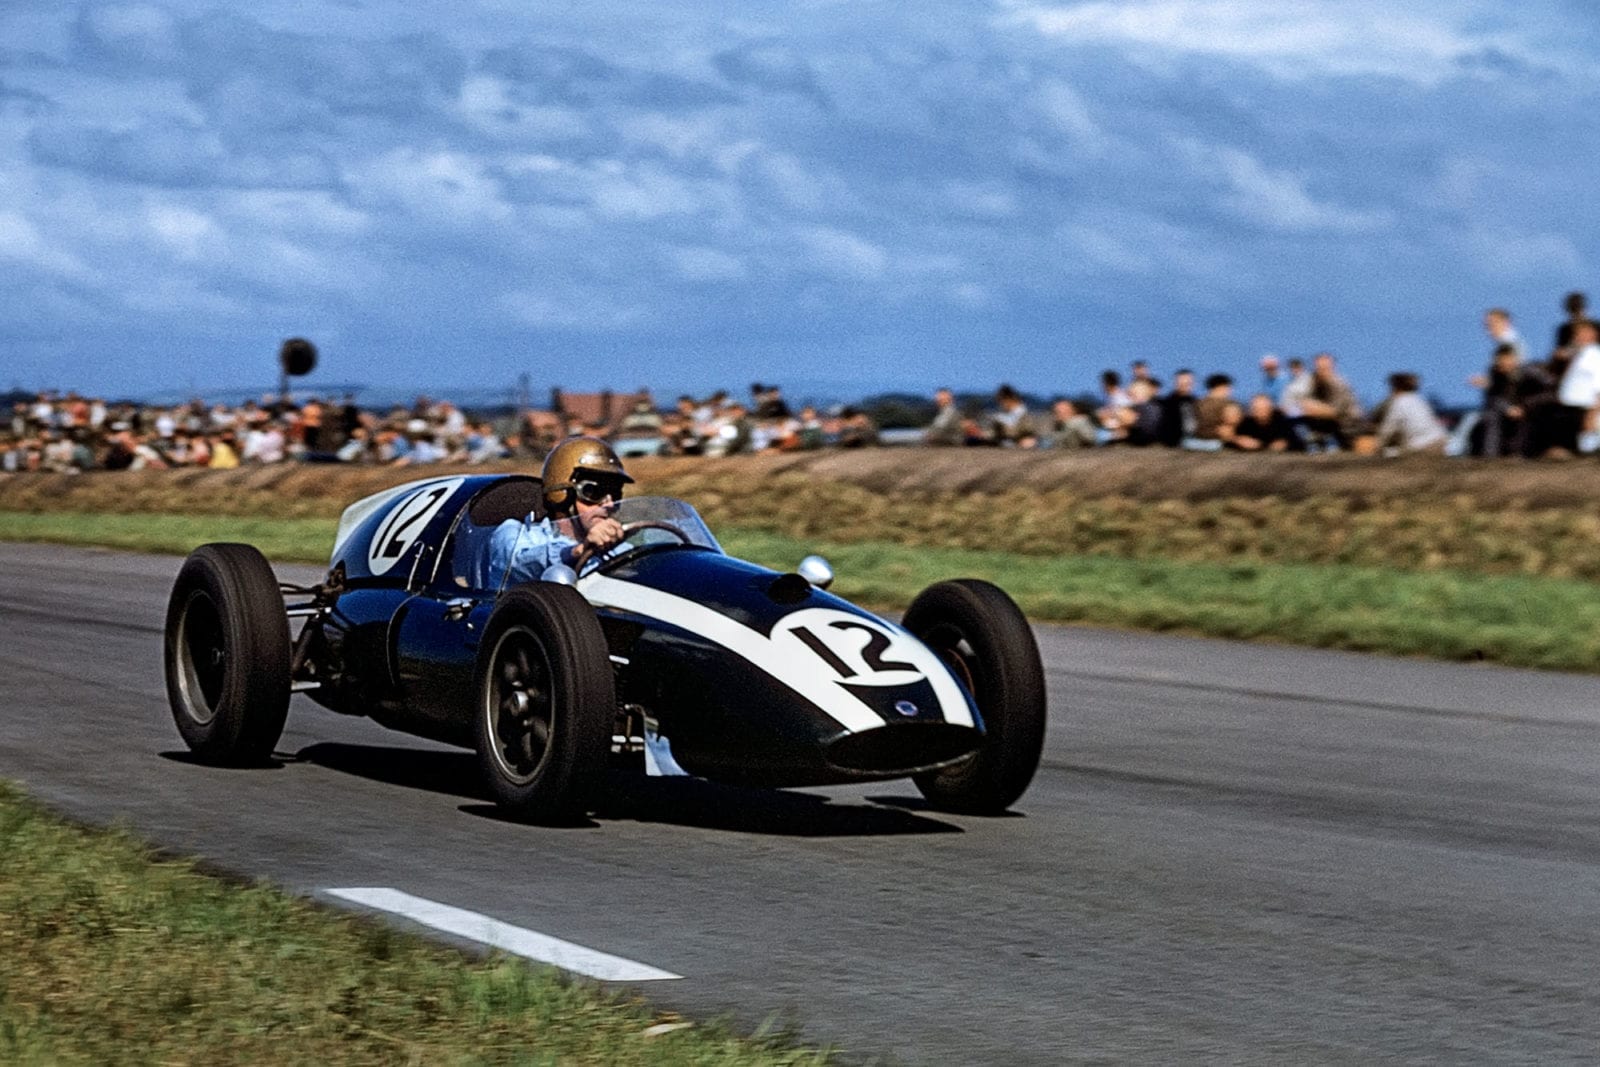 ack Brabham, Cooper-Climax T51, Grand Prix of Great Britain, Aintree, 18 July 1959. (Photo by Bernard Cahier/Getty Images)